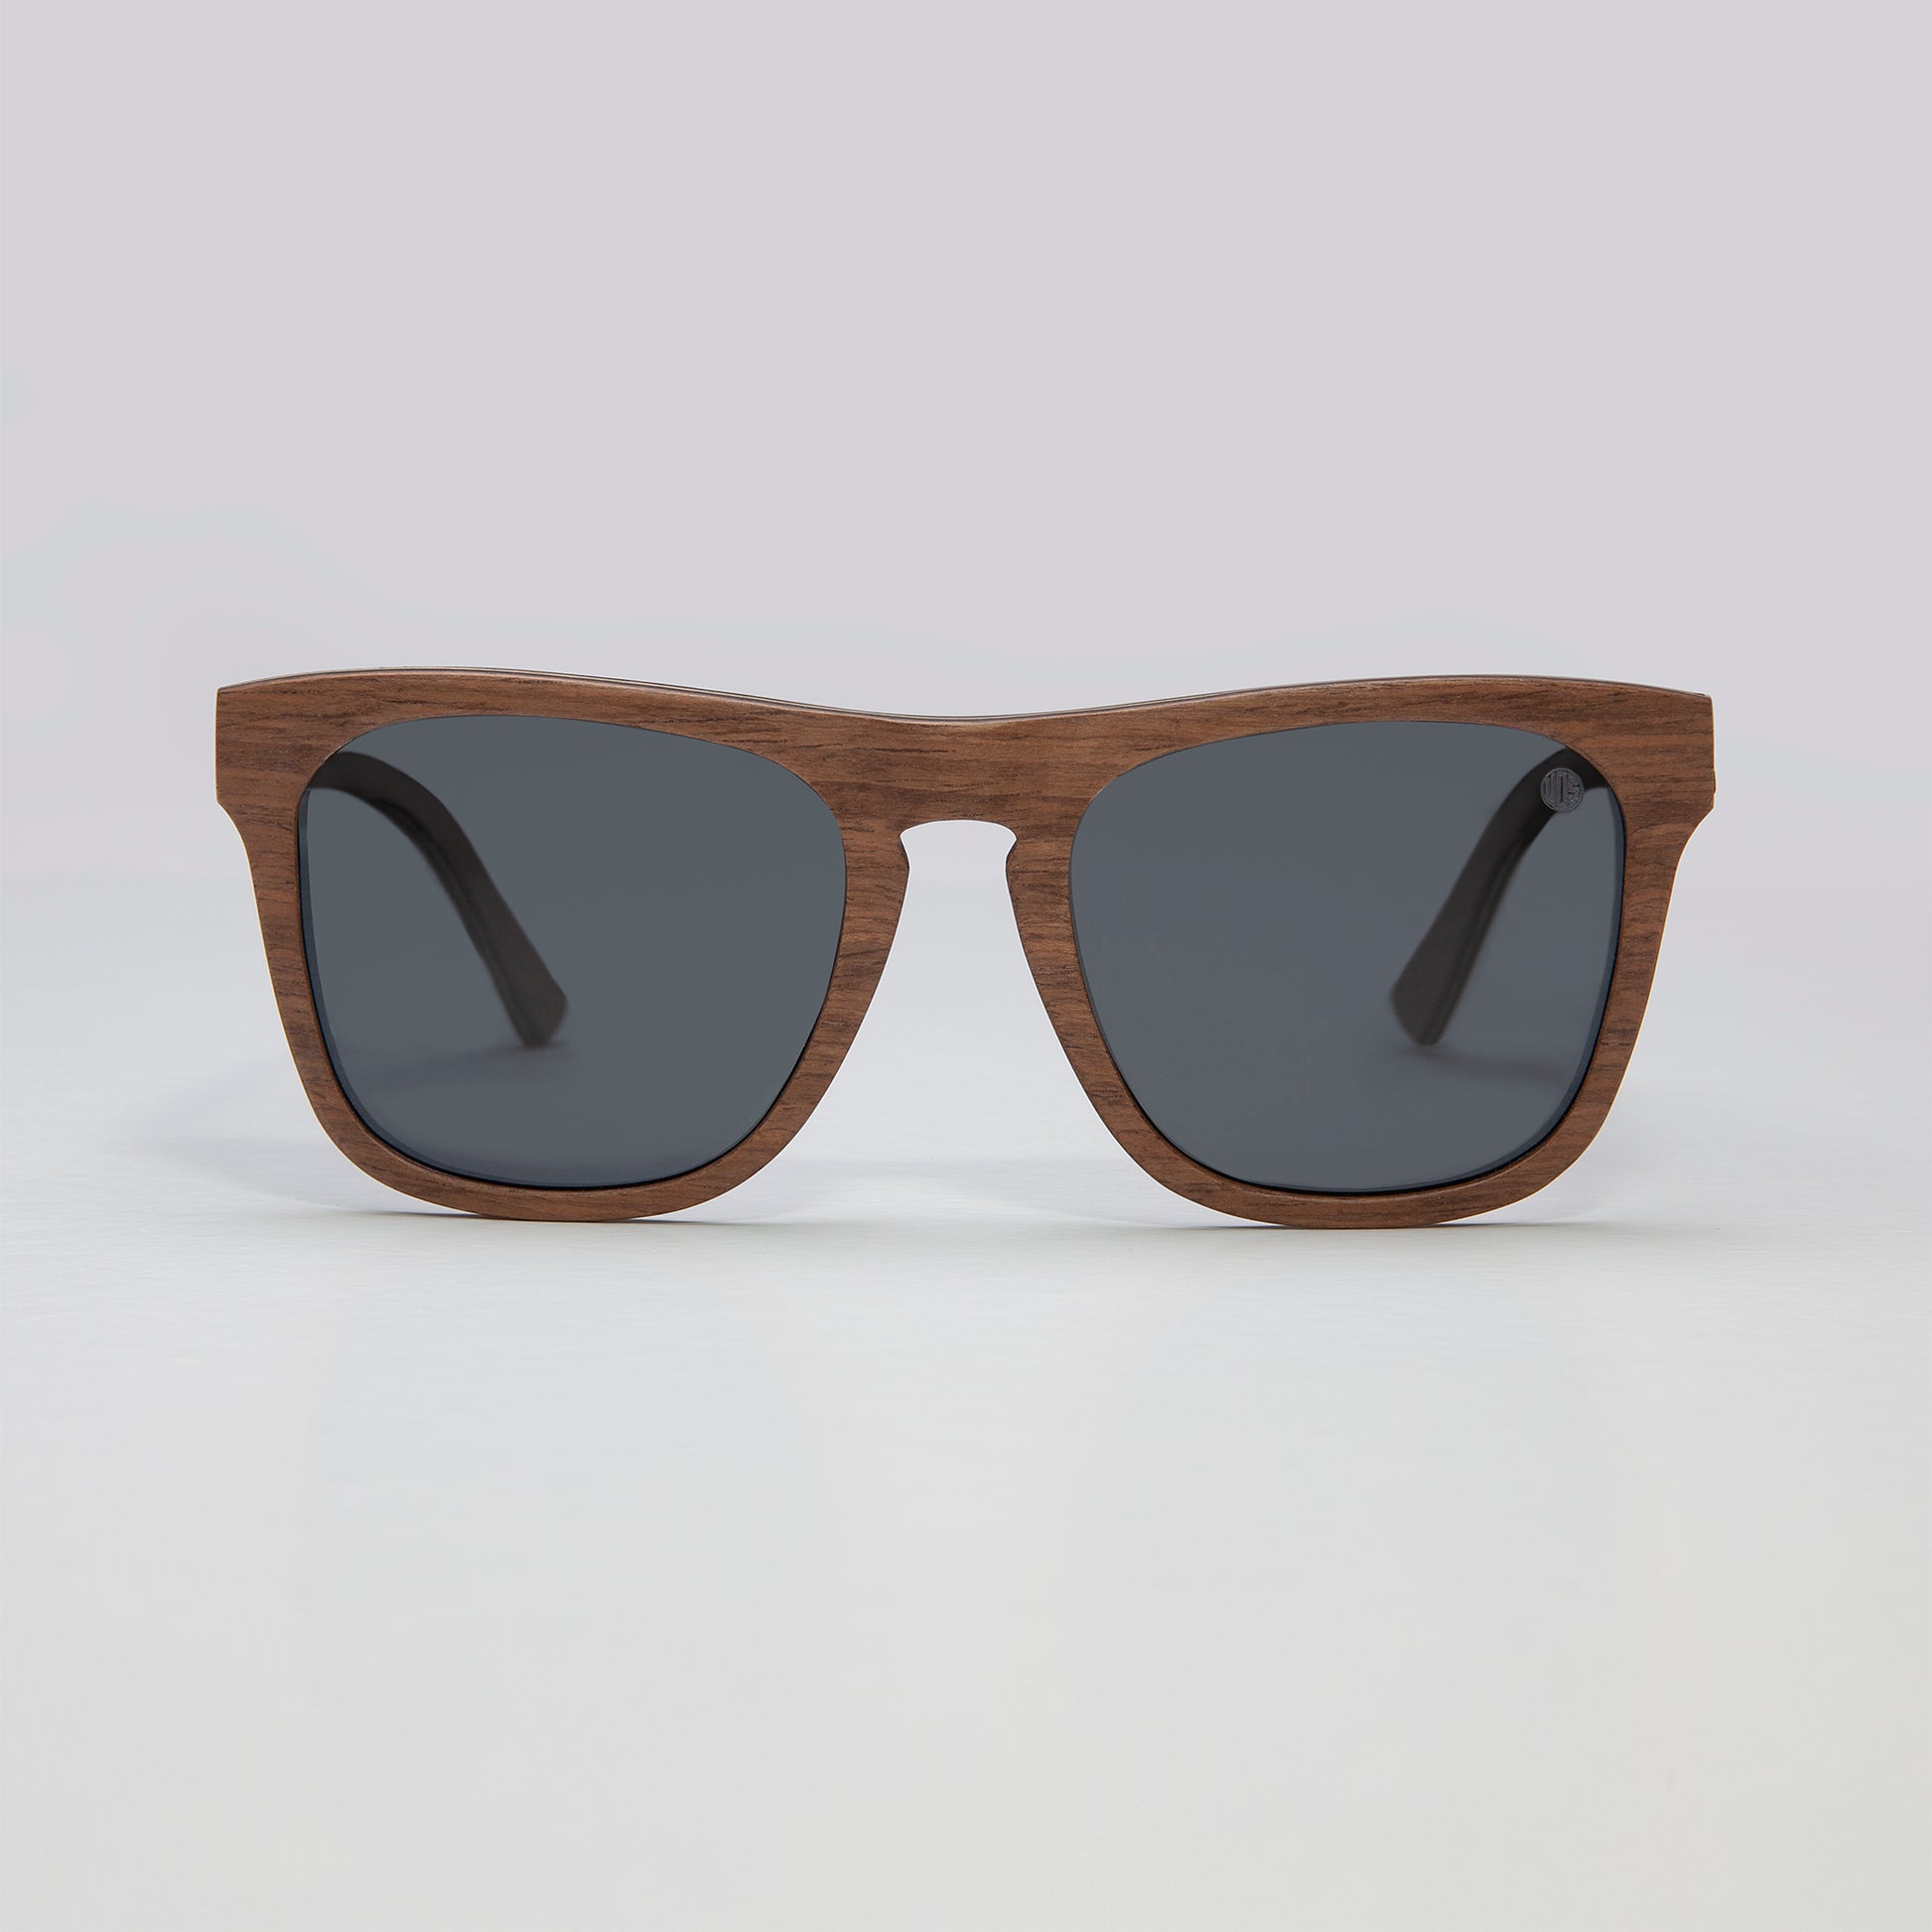 mens sunglasses Eco Friendly SunglassesWave Hog-ToffeeWave Hog is a classic design with a splash of modern.  The laminate construction make these glasses strong but super lightweight and comfortable.  Every pair of Wav